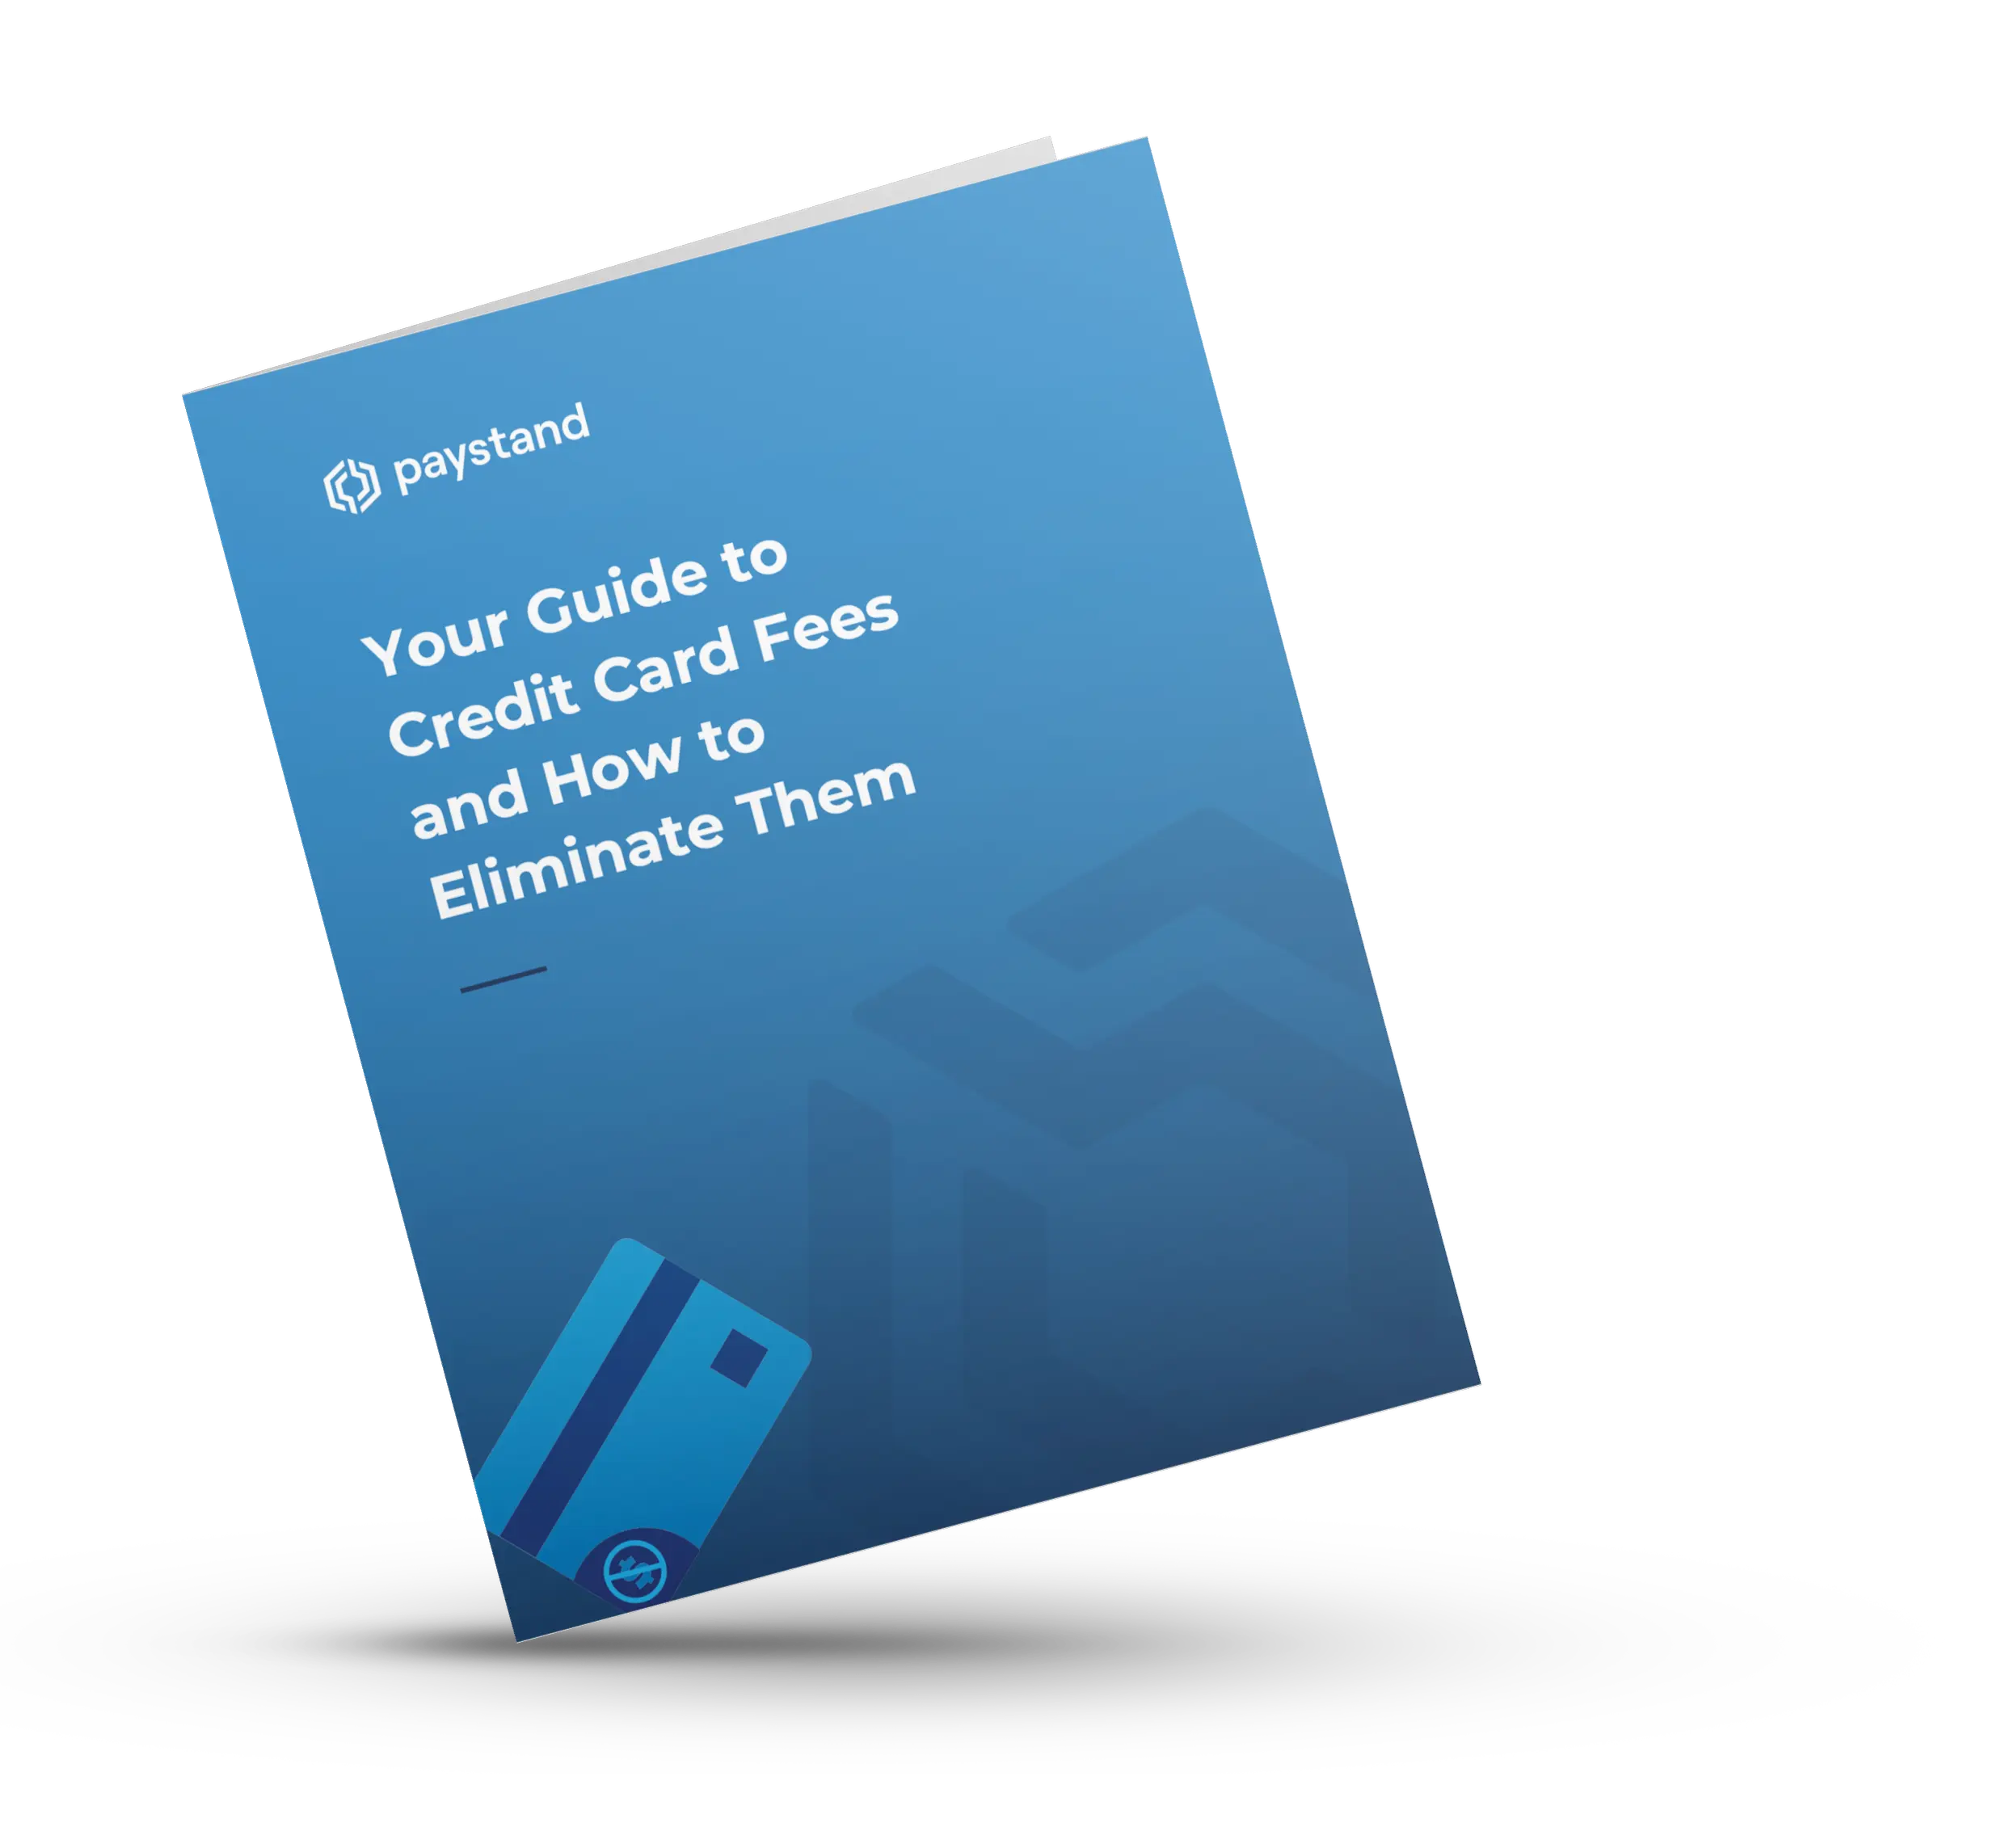 Mockup Your Guide to Credit Card Fees and How to Eliminate Them 2